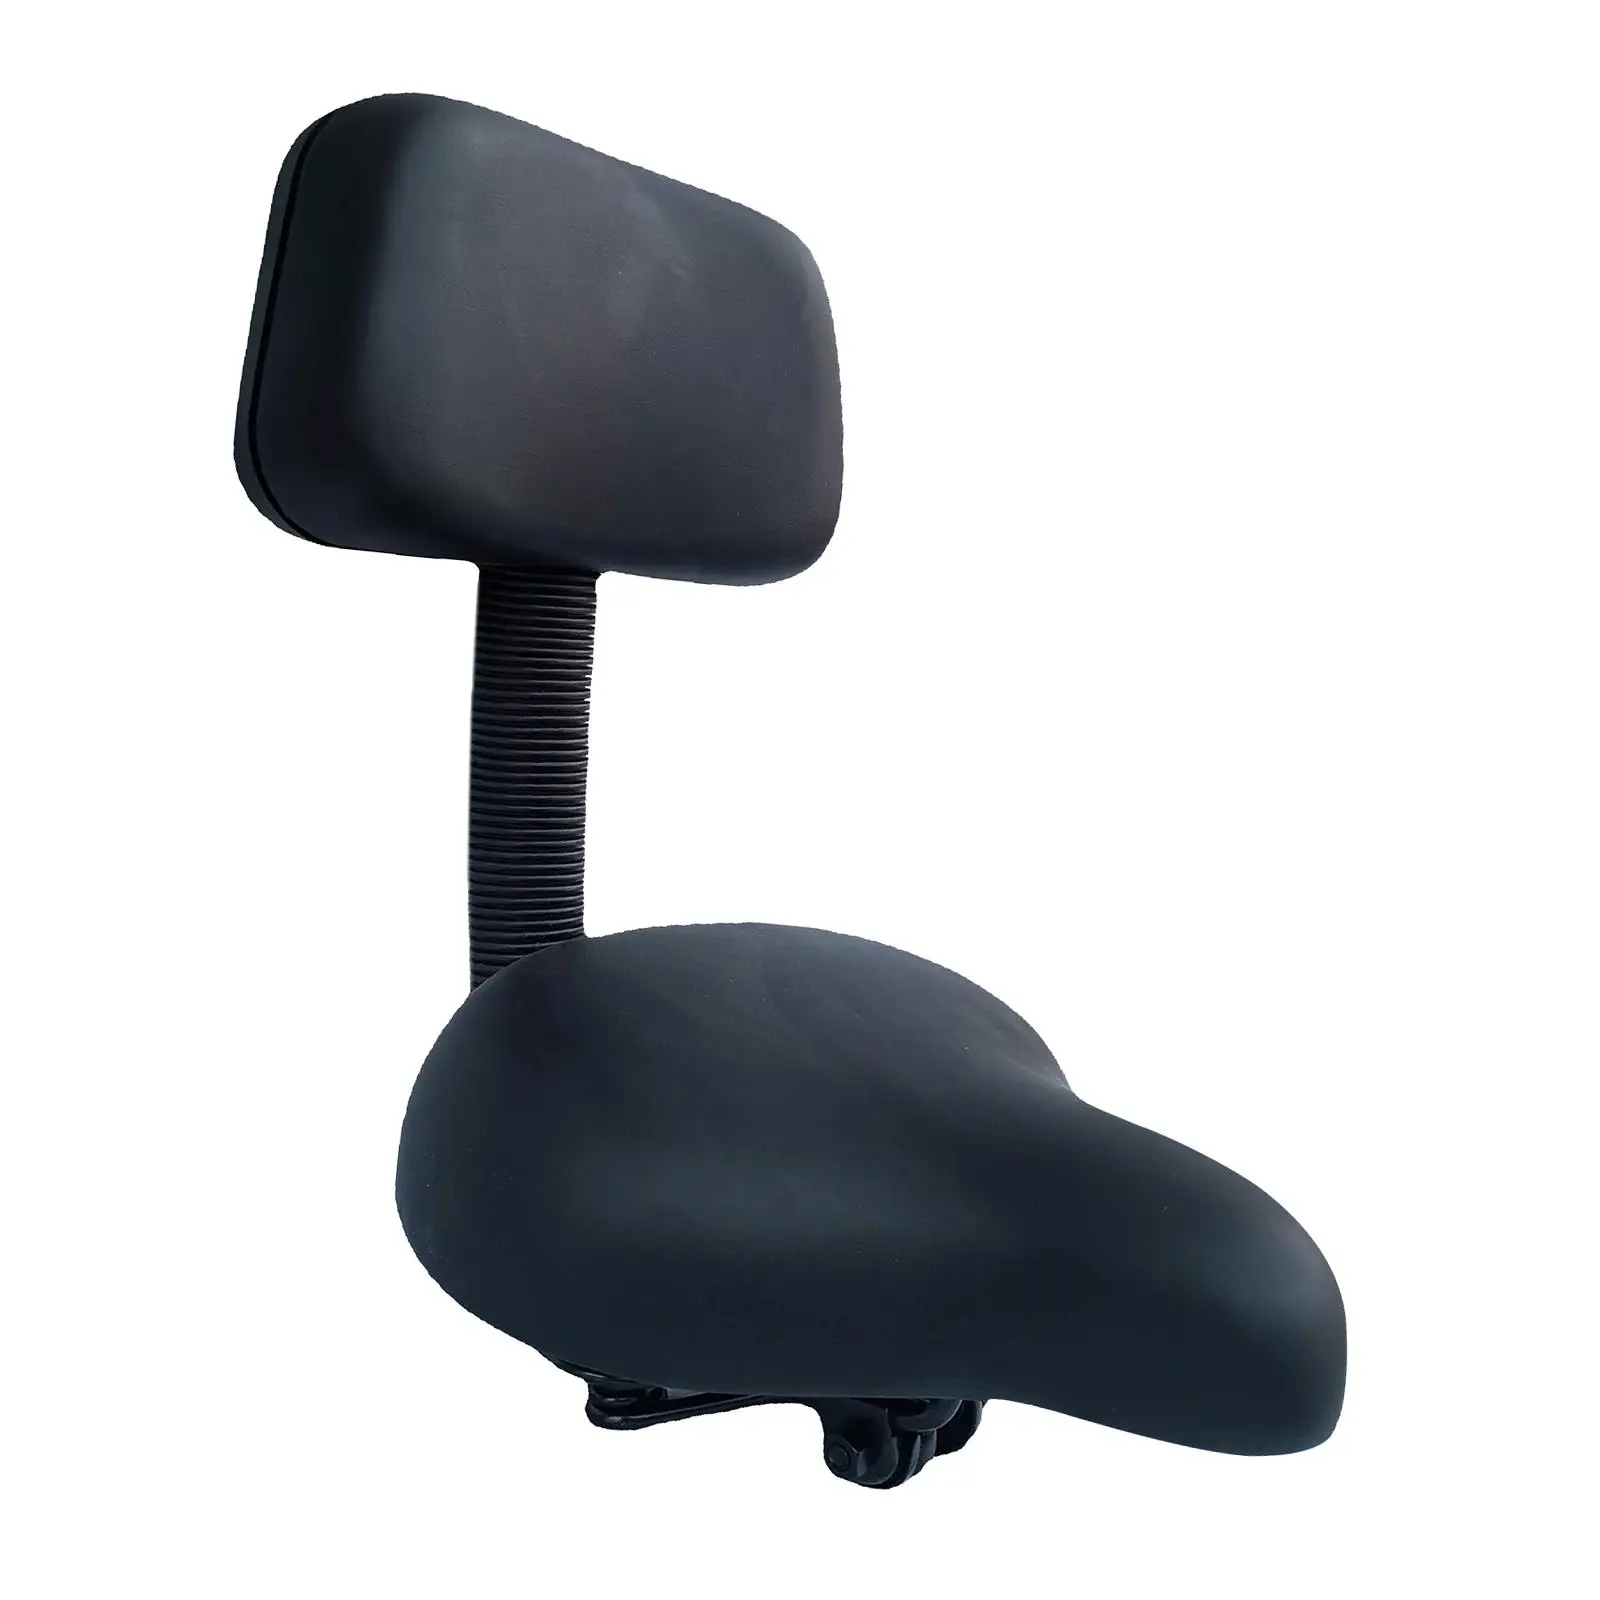 Electric Bicycle Saddle Foam Padded Widened Bike Seat with Backrest PU Cushion Durable Shock Absorbing Comfort Cycling Parts